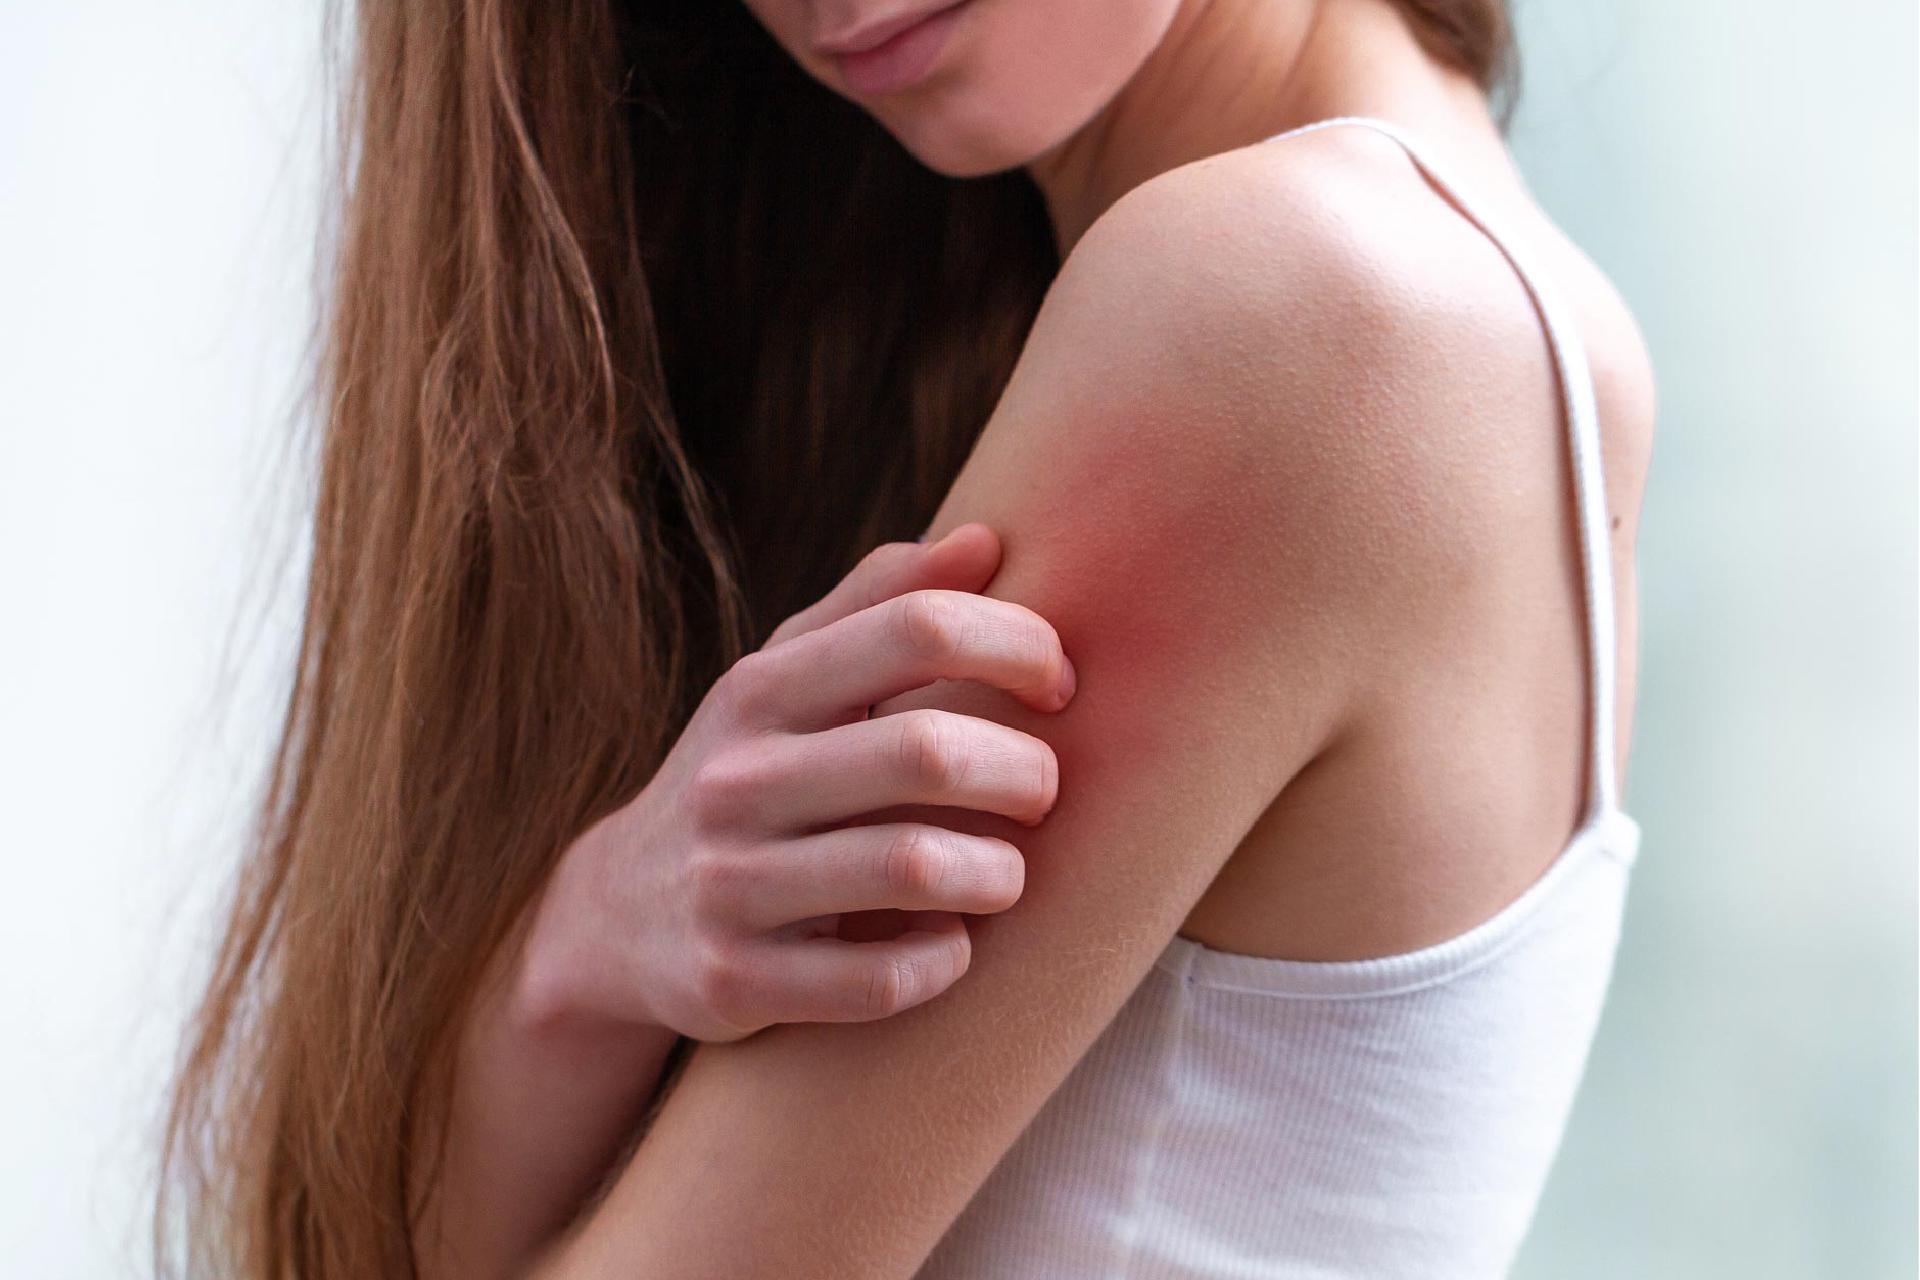 Five Fall Season Skin Problems to Look Out for This Season